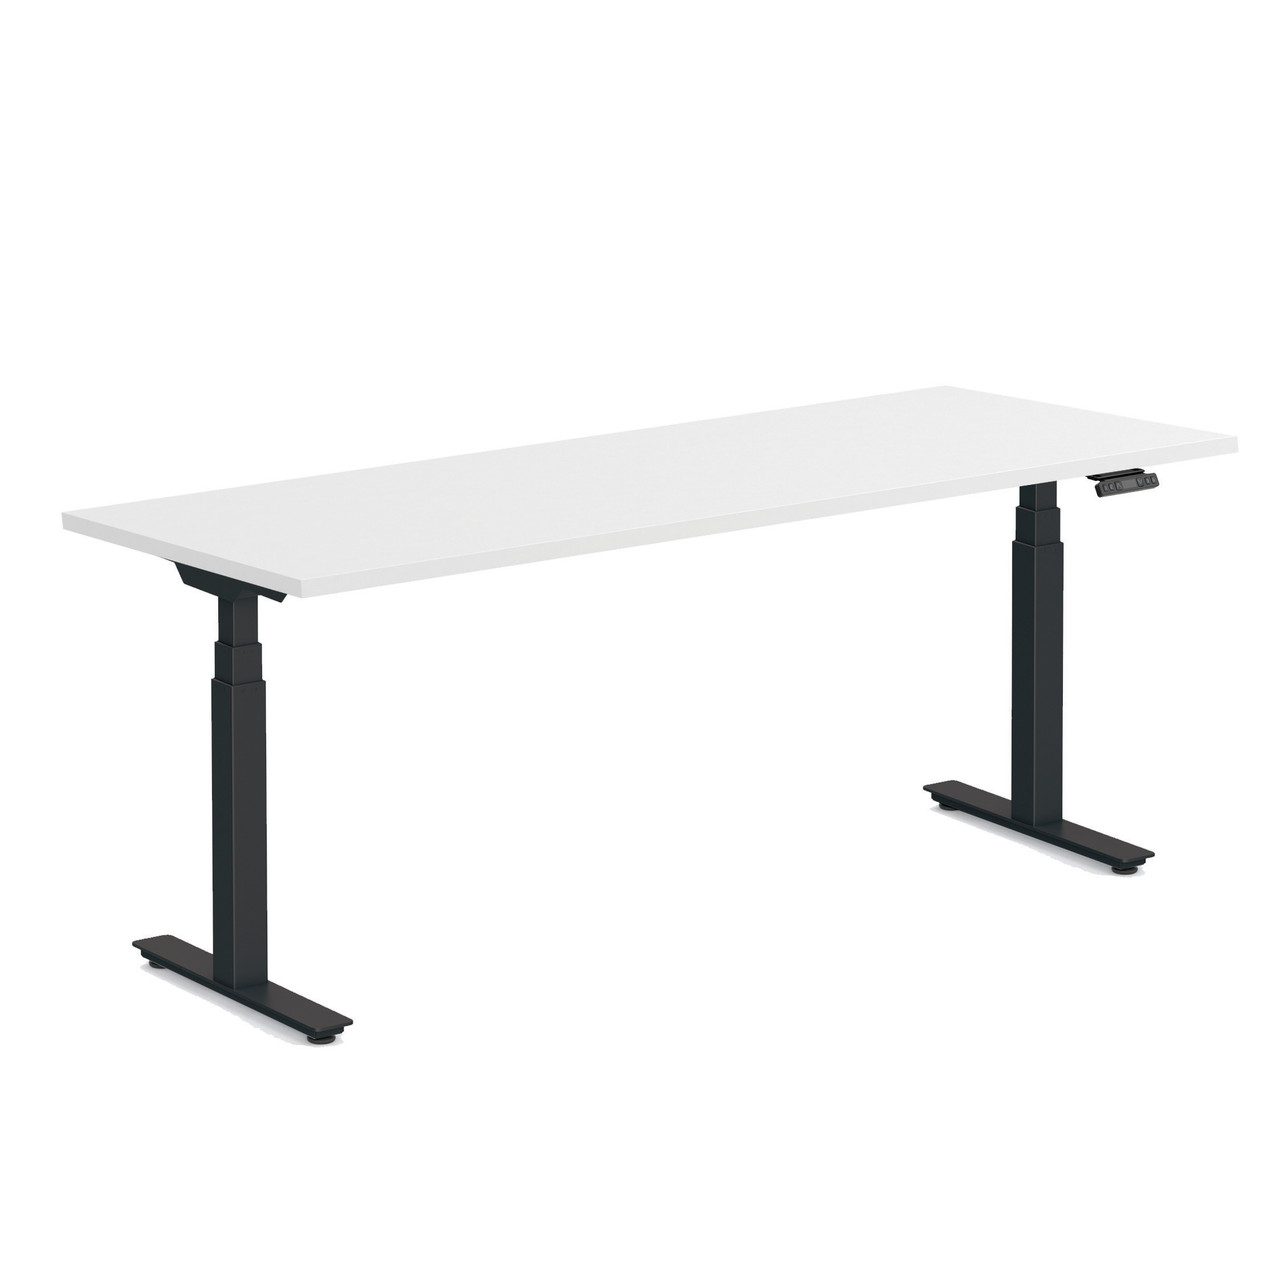 3-Stage, Deluxe Electric, Height Adjustable 30″D x 72″W Desk w/White Top – PLTHATFEET30 Included